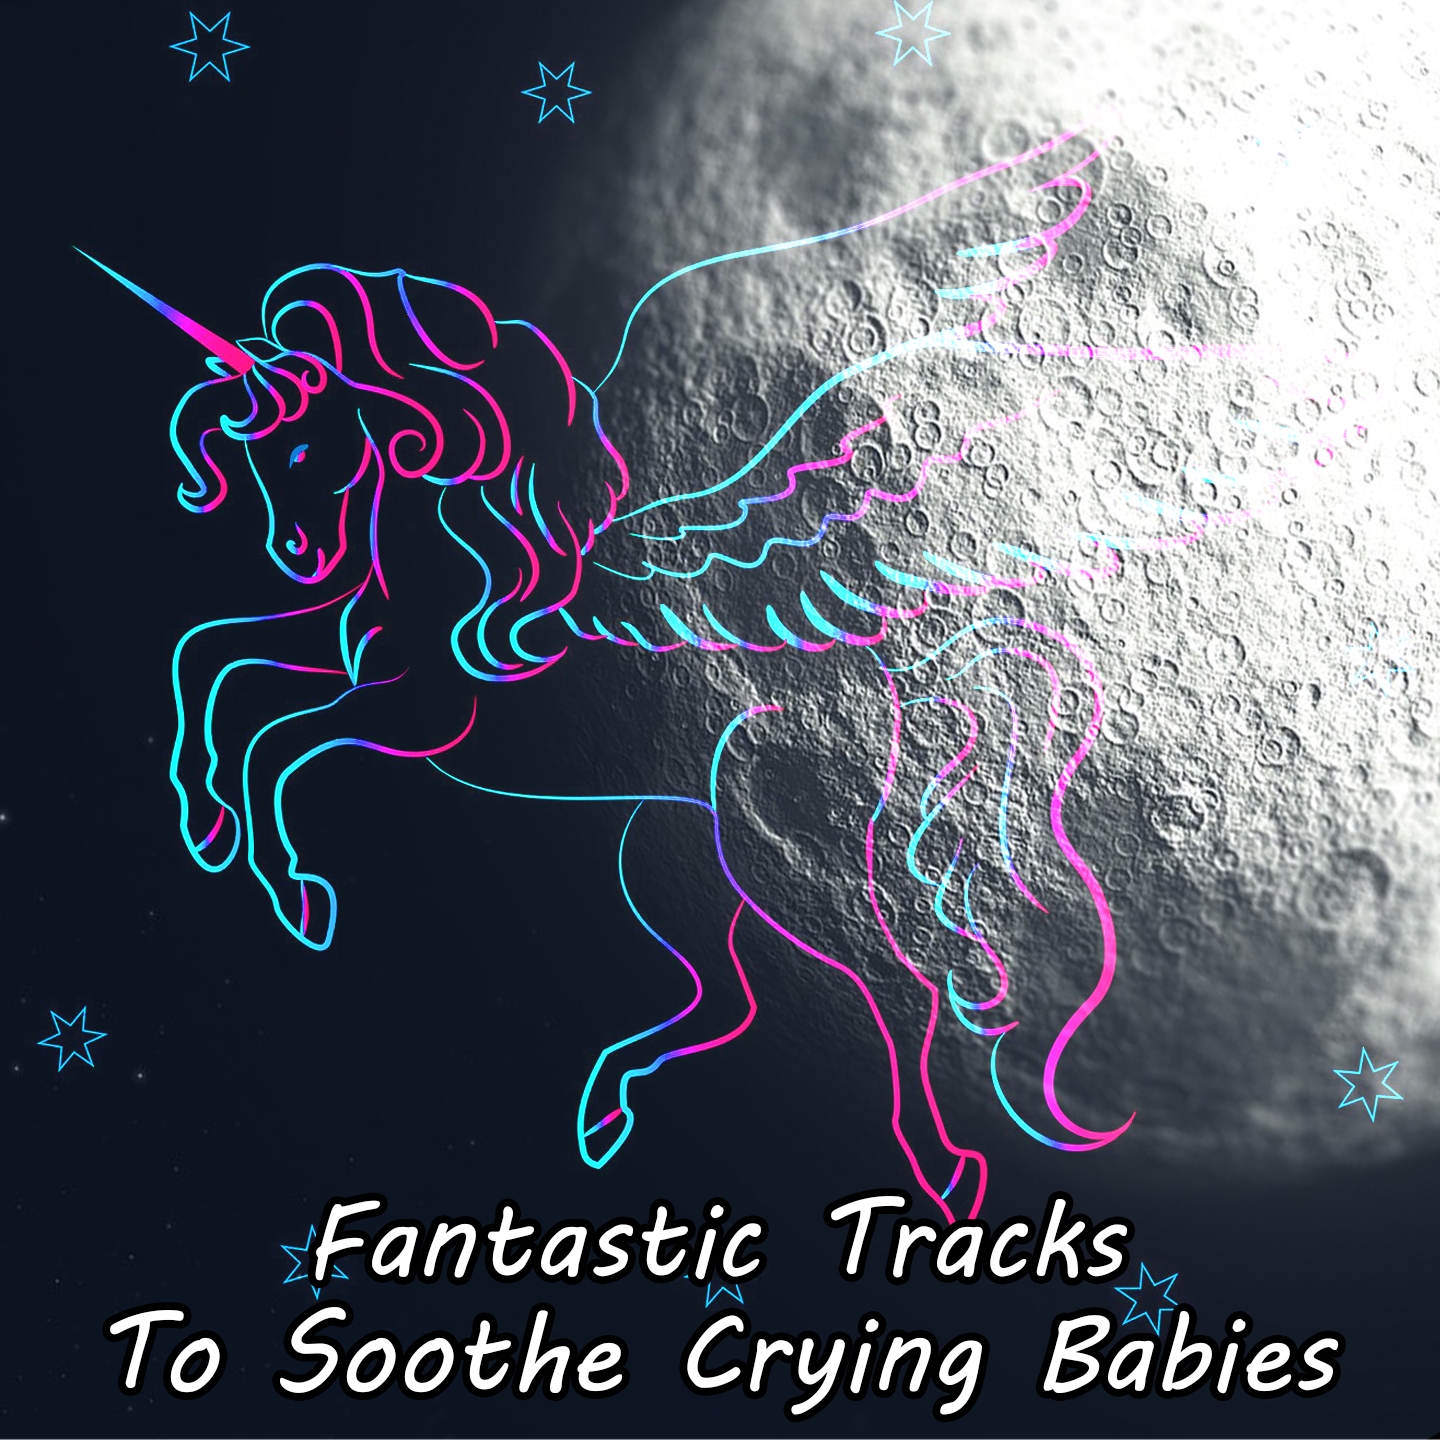 Fantastic Tracks To Soothe Crying Babies